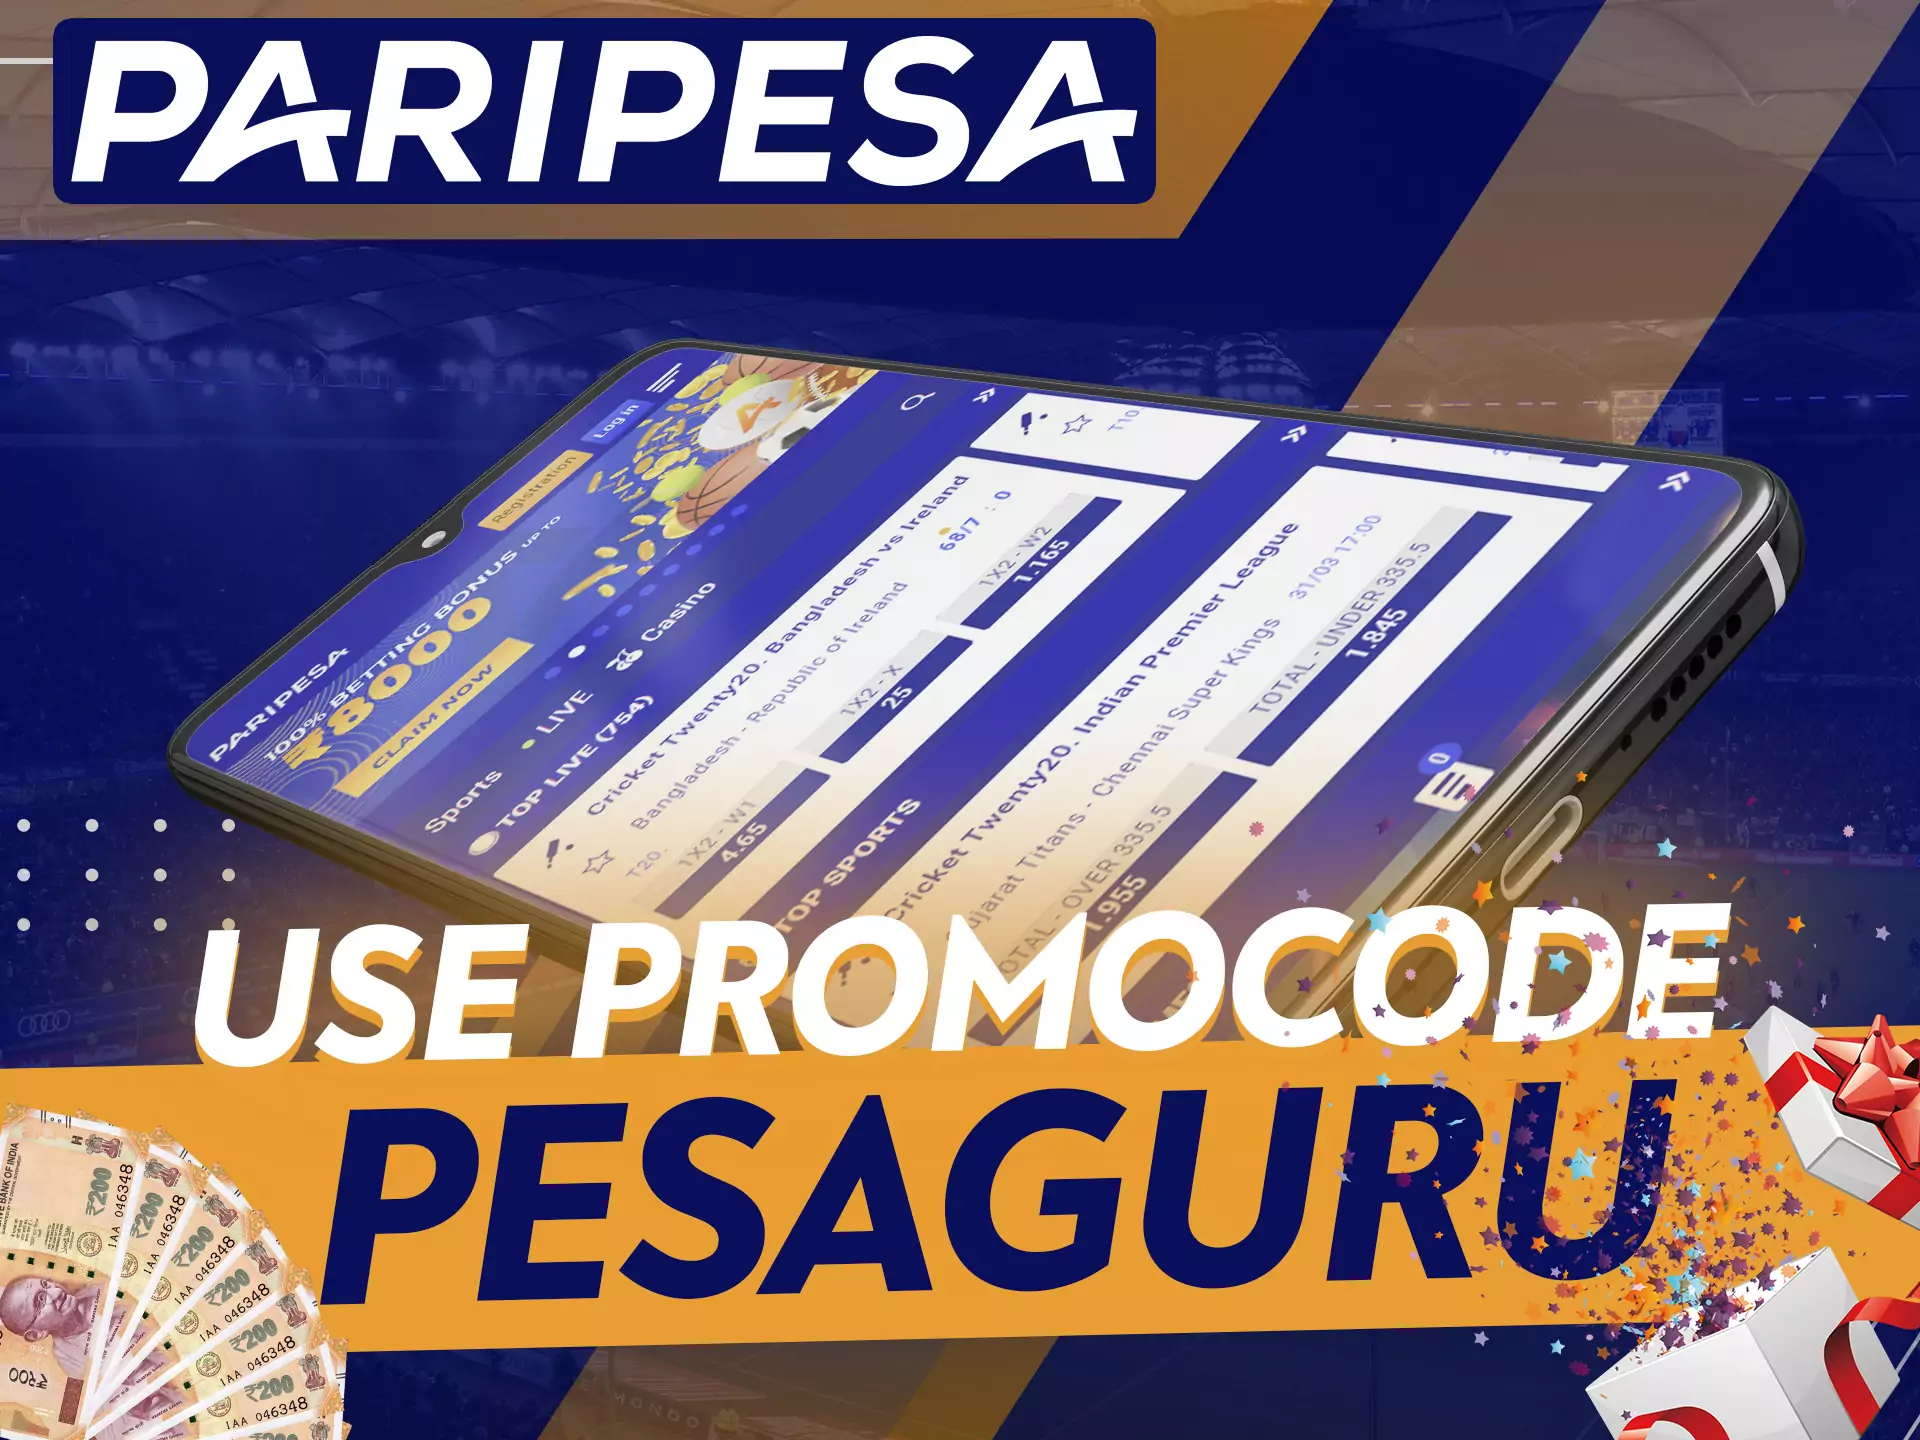 At Paripesa, be sure to apply a special promo code to get more benefits.